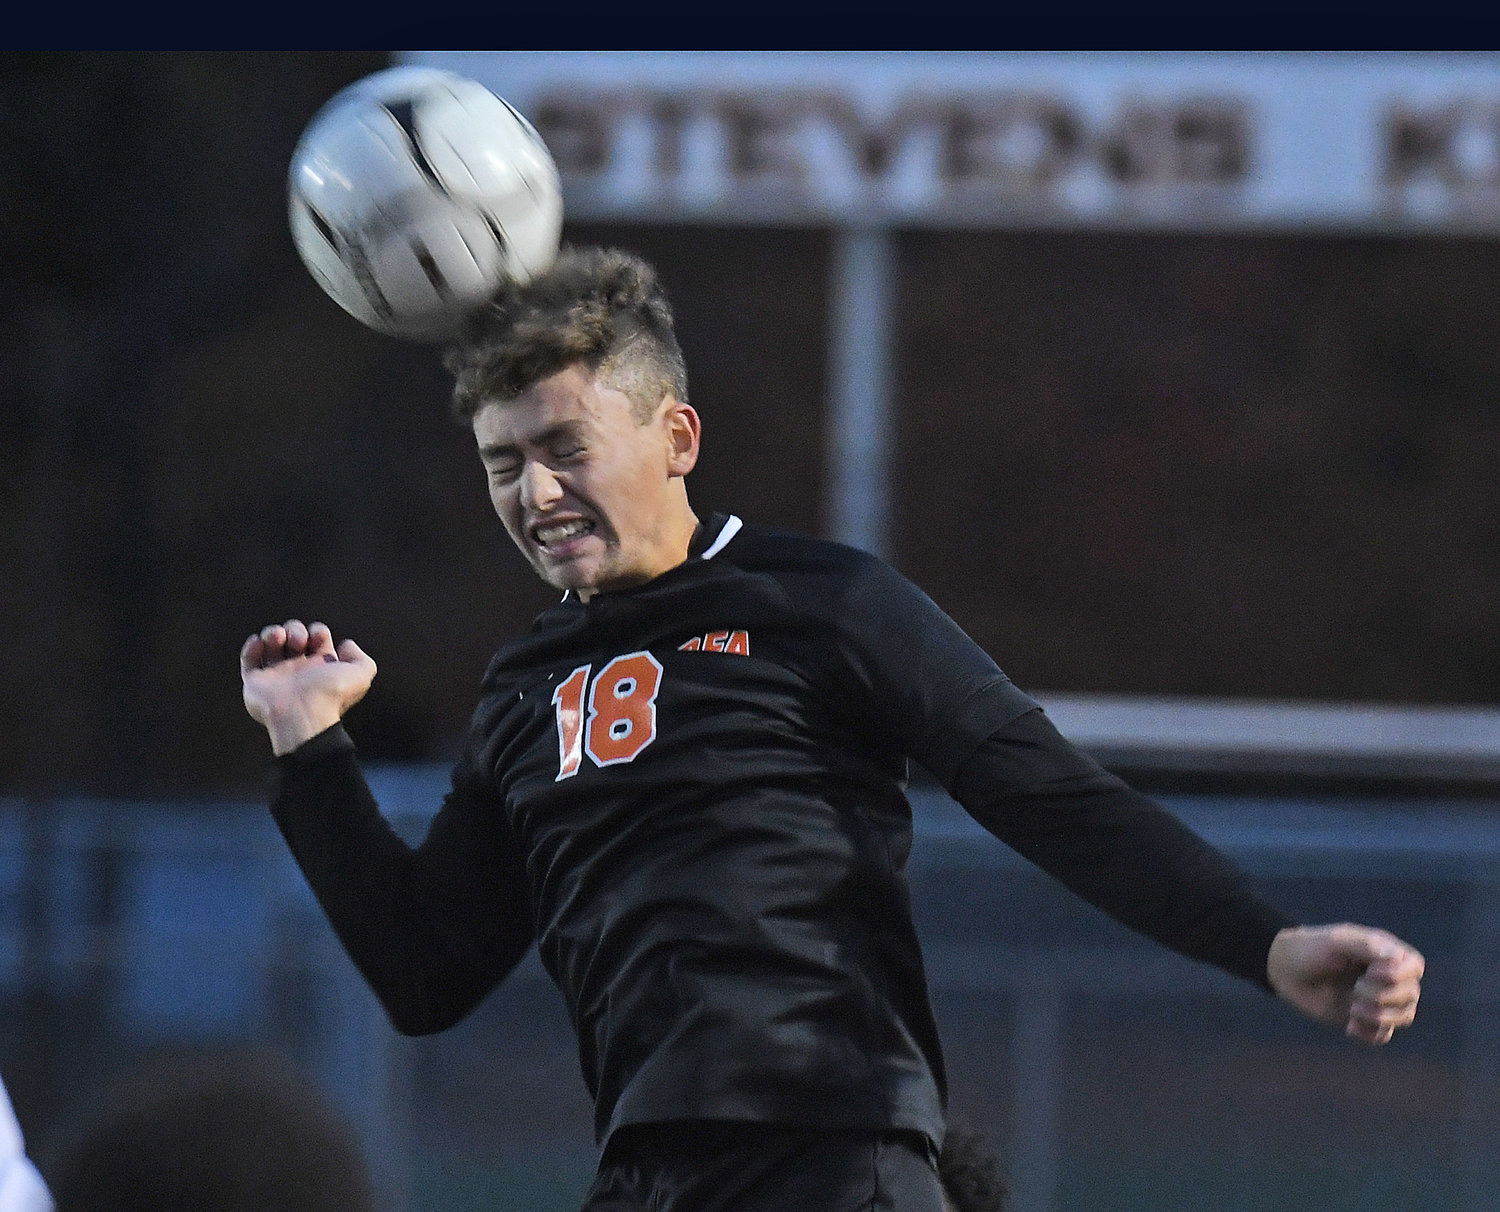 Rome Free Academy's Collin Mummert heads the ball to the middle of the field in the first half against Fowler Wednesday night at RFA Stadium. RFA won 1-0 on a late goal to advance to the quarterfinals of the Section III Class AA playoffs.